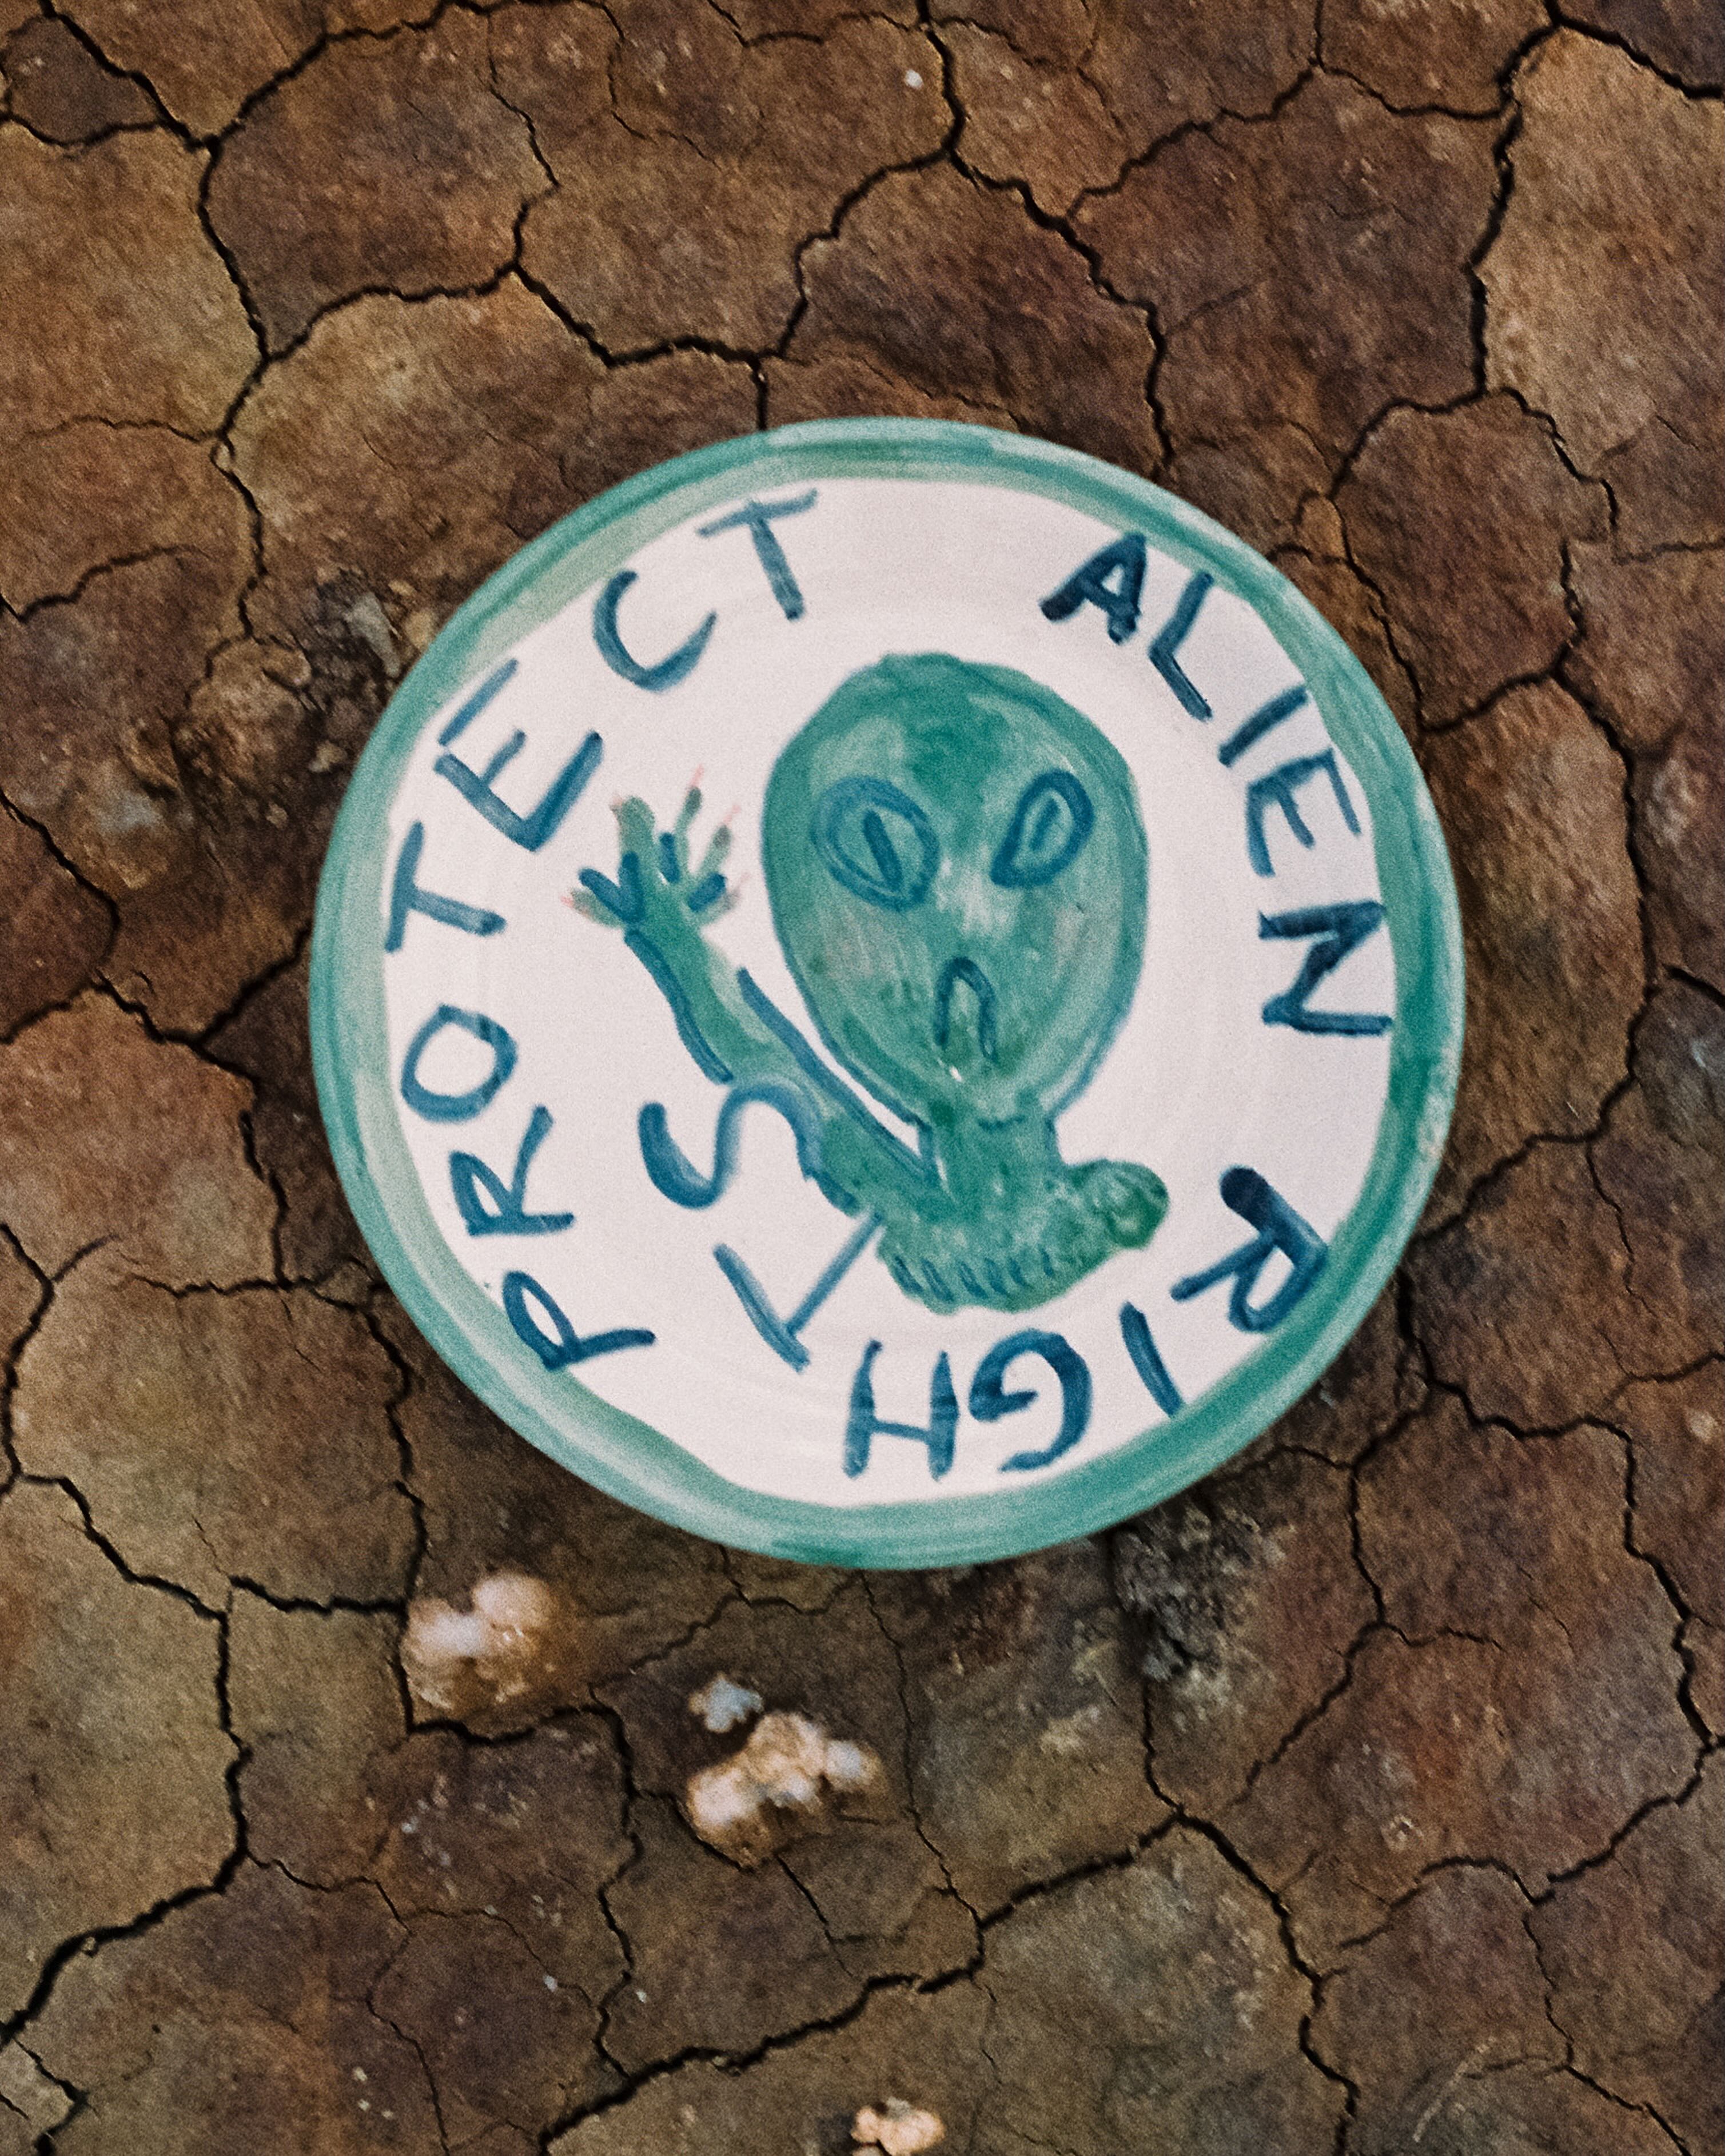 "Protect alien rights" small plate